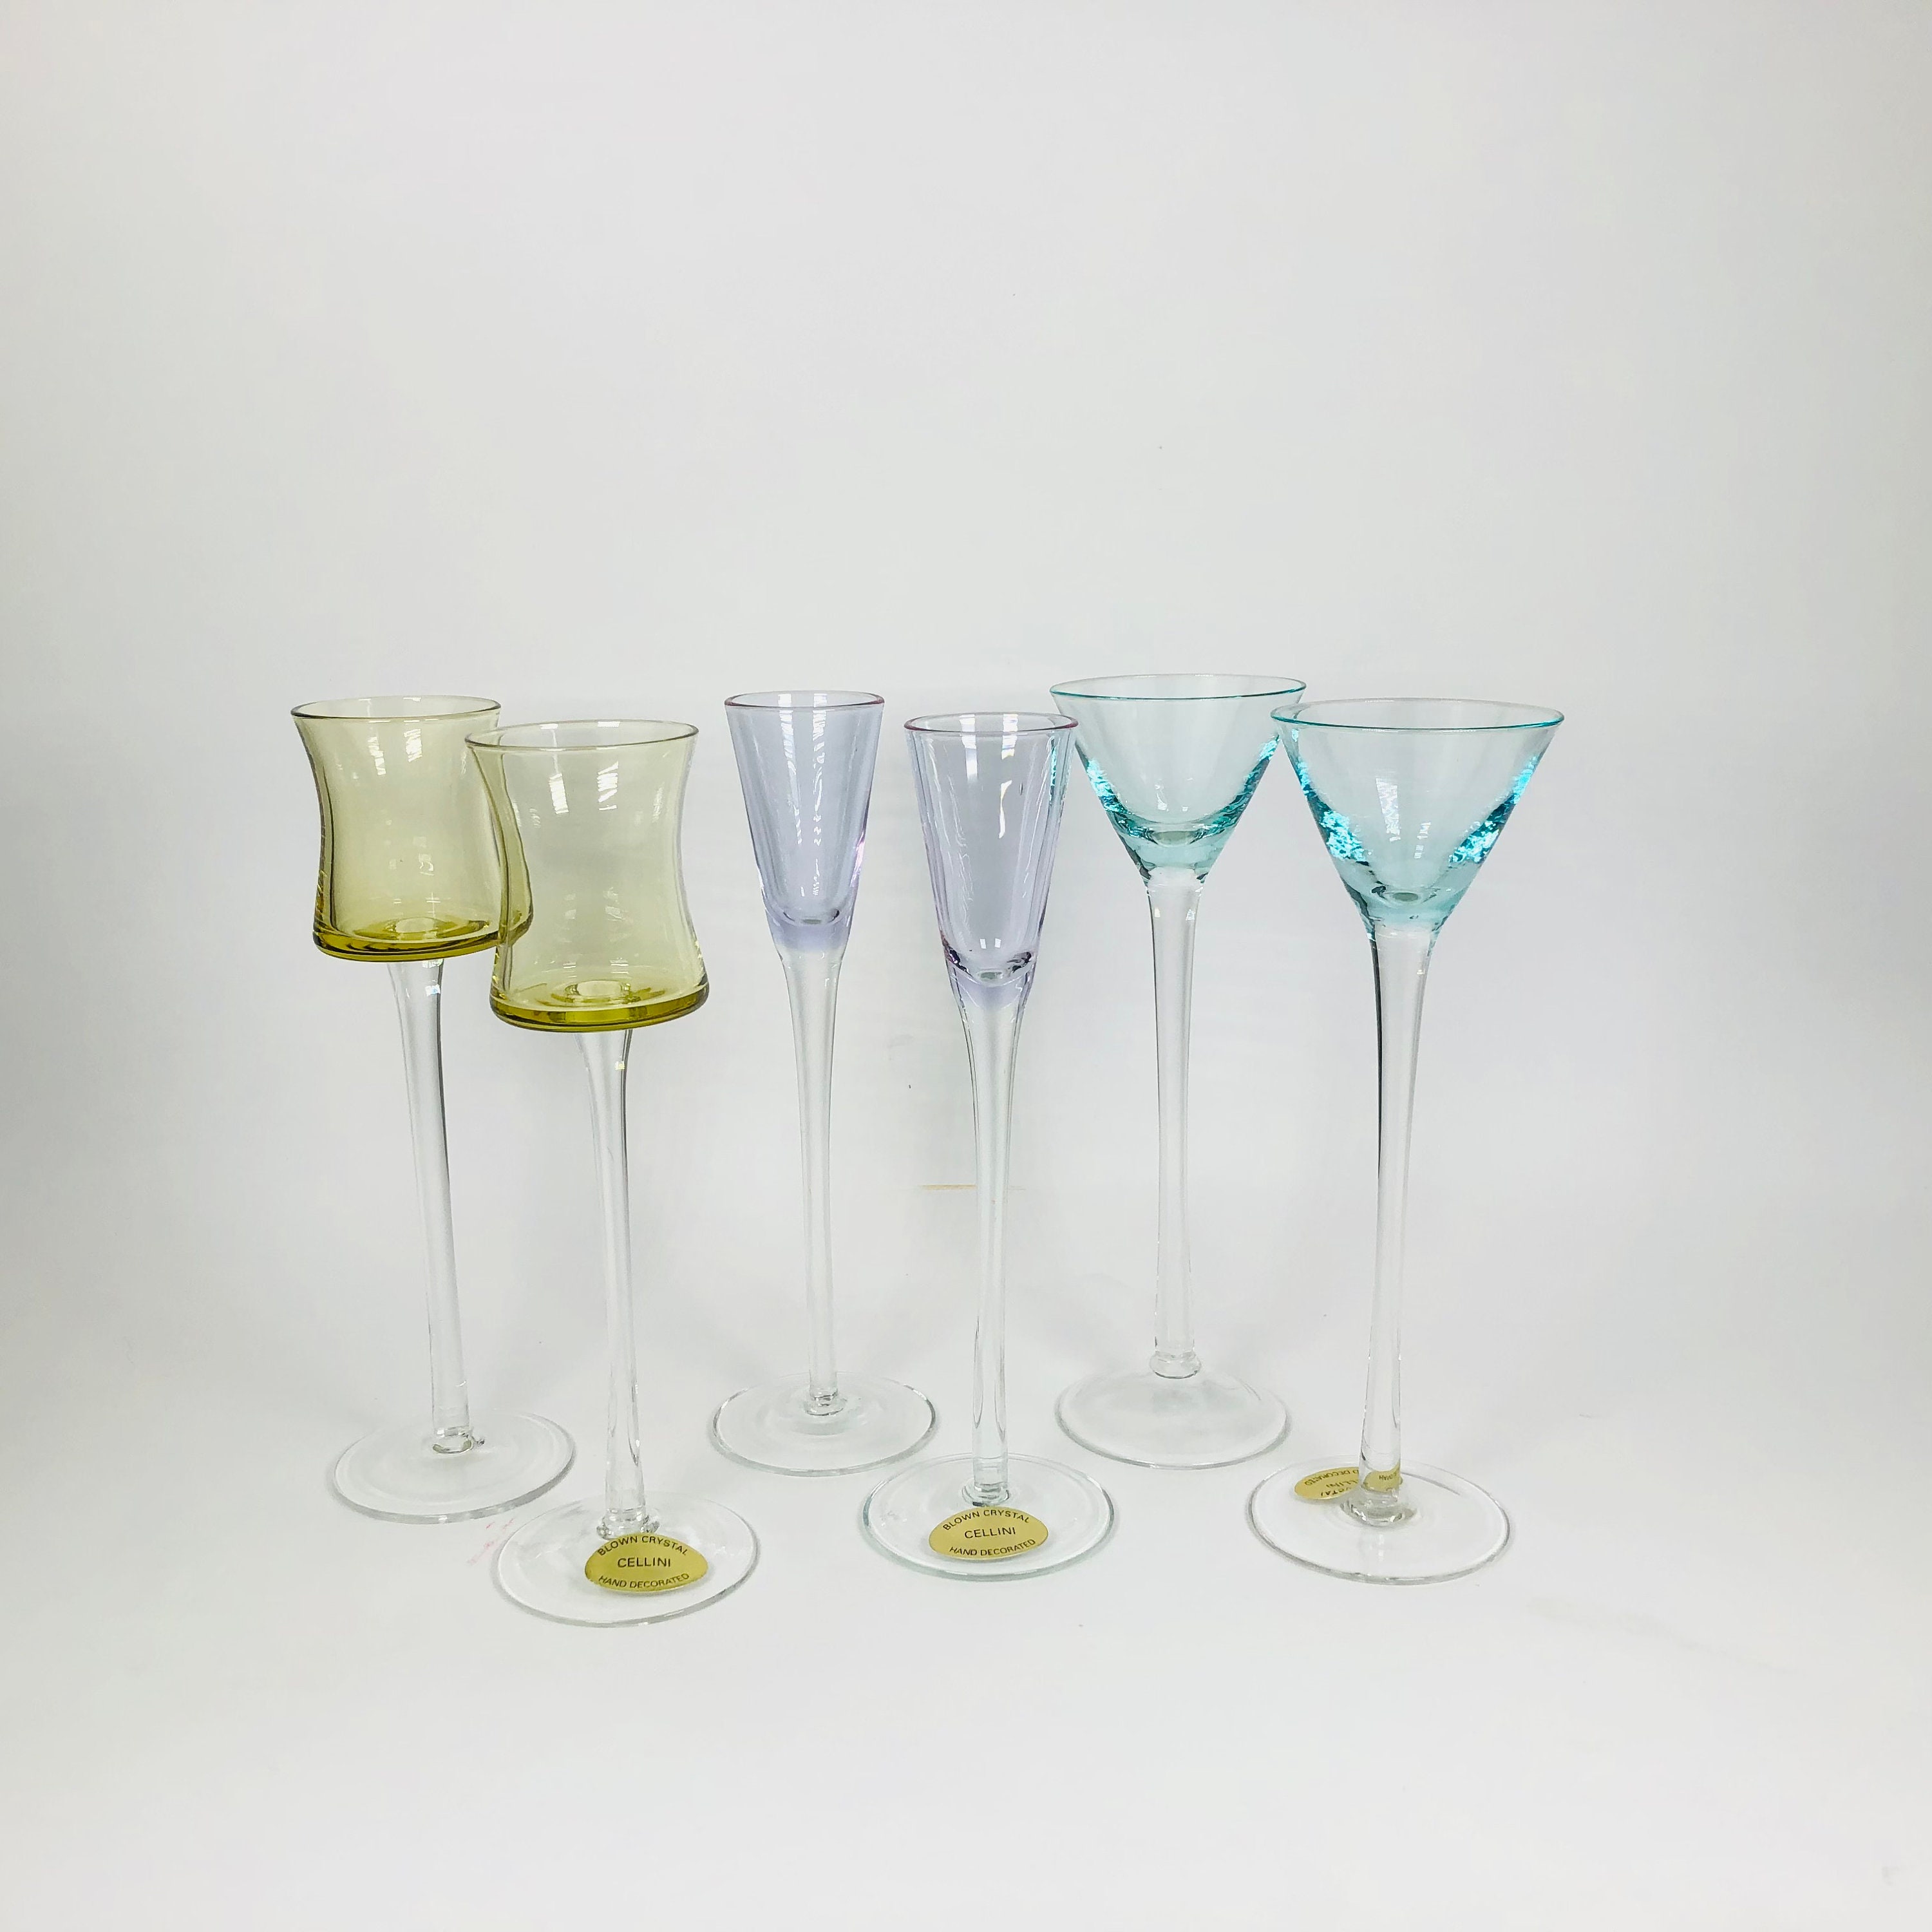 Lorren Home Trends Multicolor Champagne Flutes with Gold Rings, Set of 4